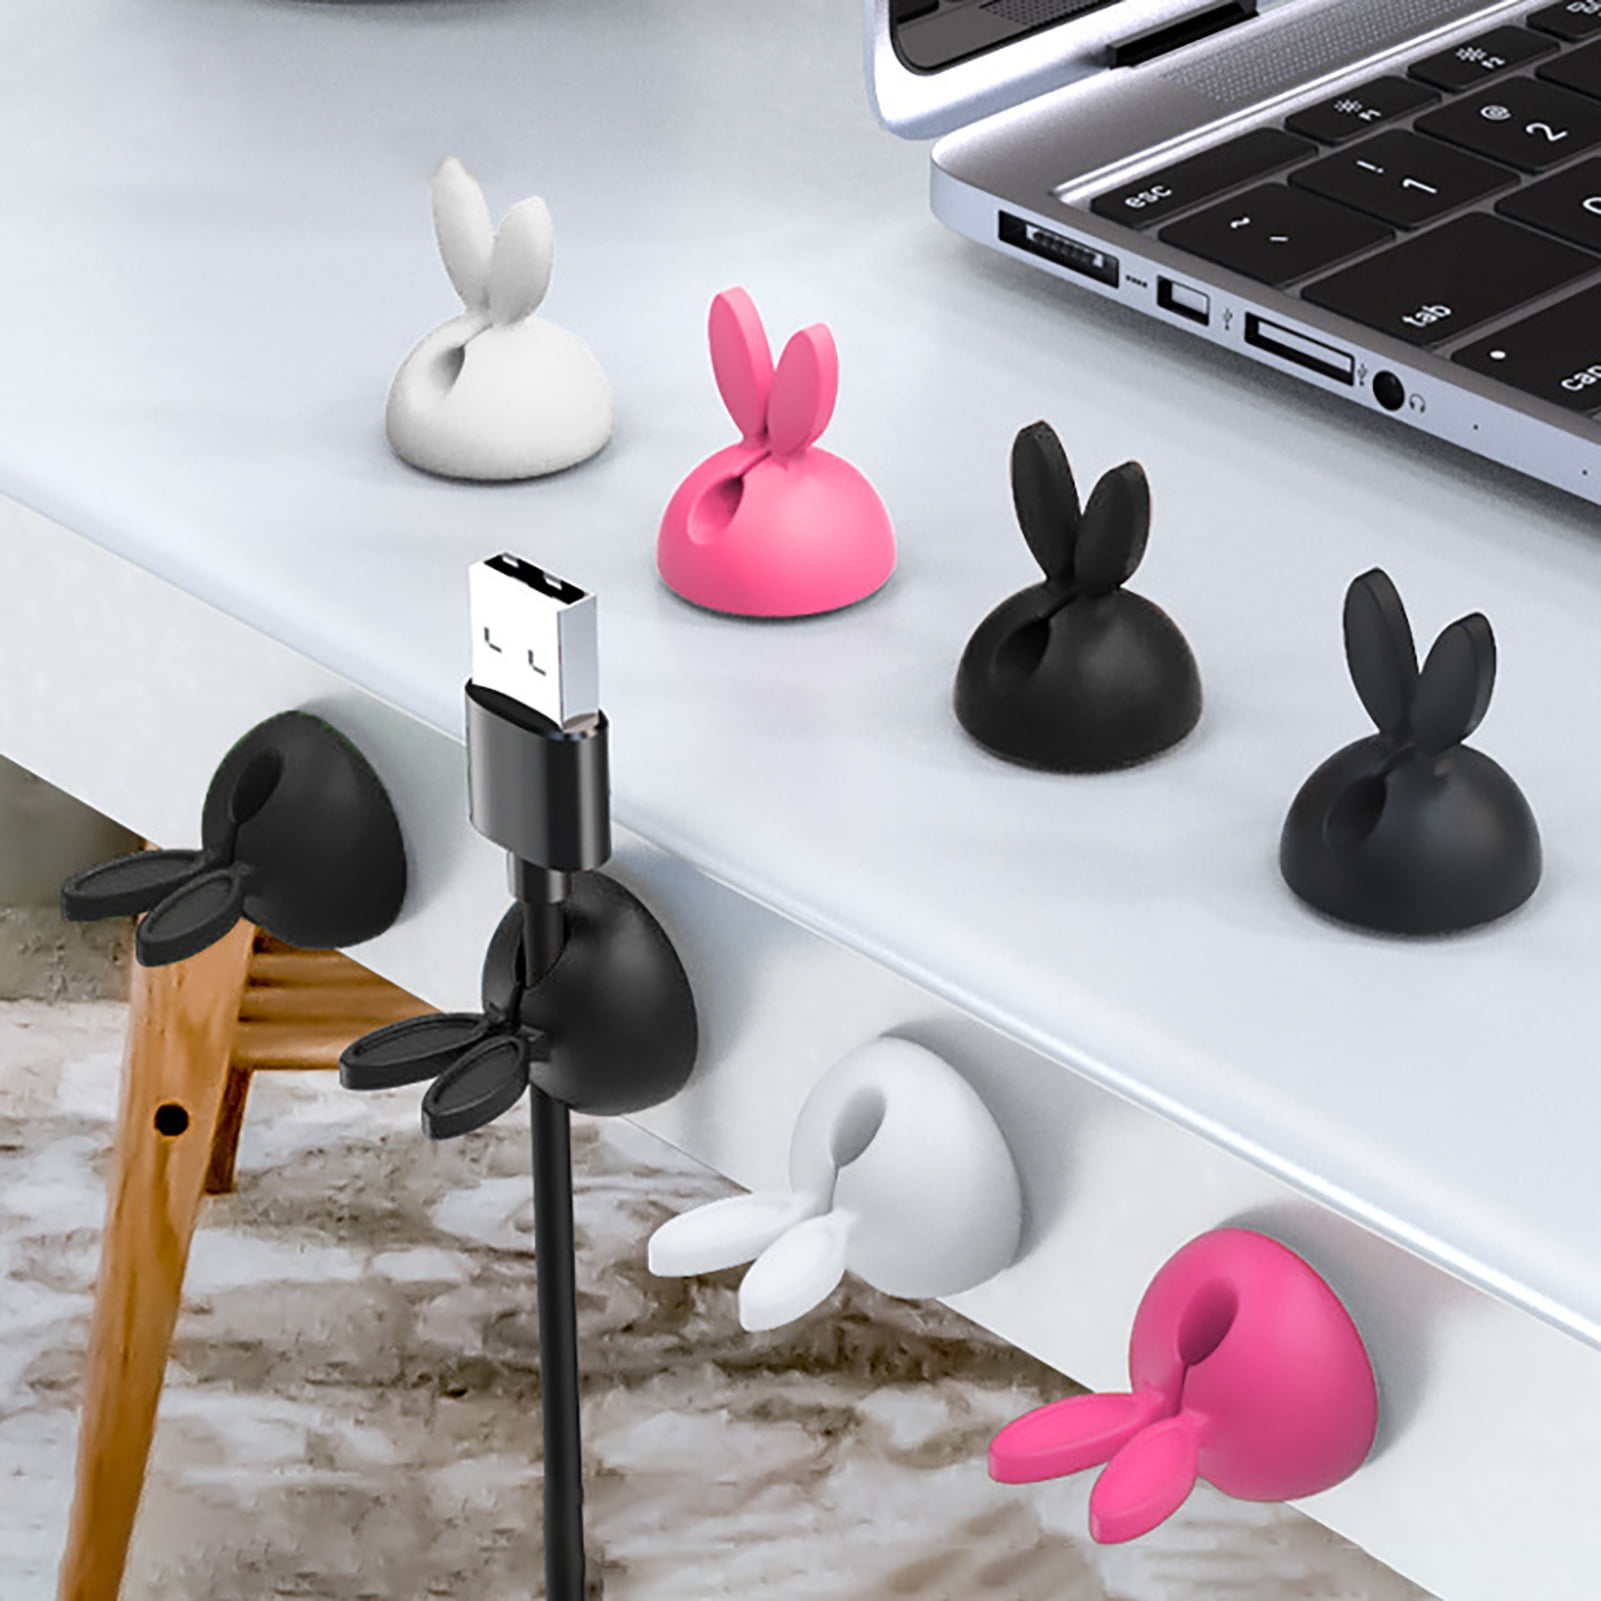 Mairbeon 3Pcs/Set Cable Holder Creative Cartoon Rabbit Ear Shape Silicone  Self-adhesive Wire Cord Organizer Clip for Office 